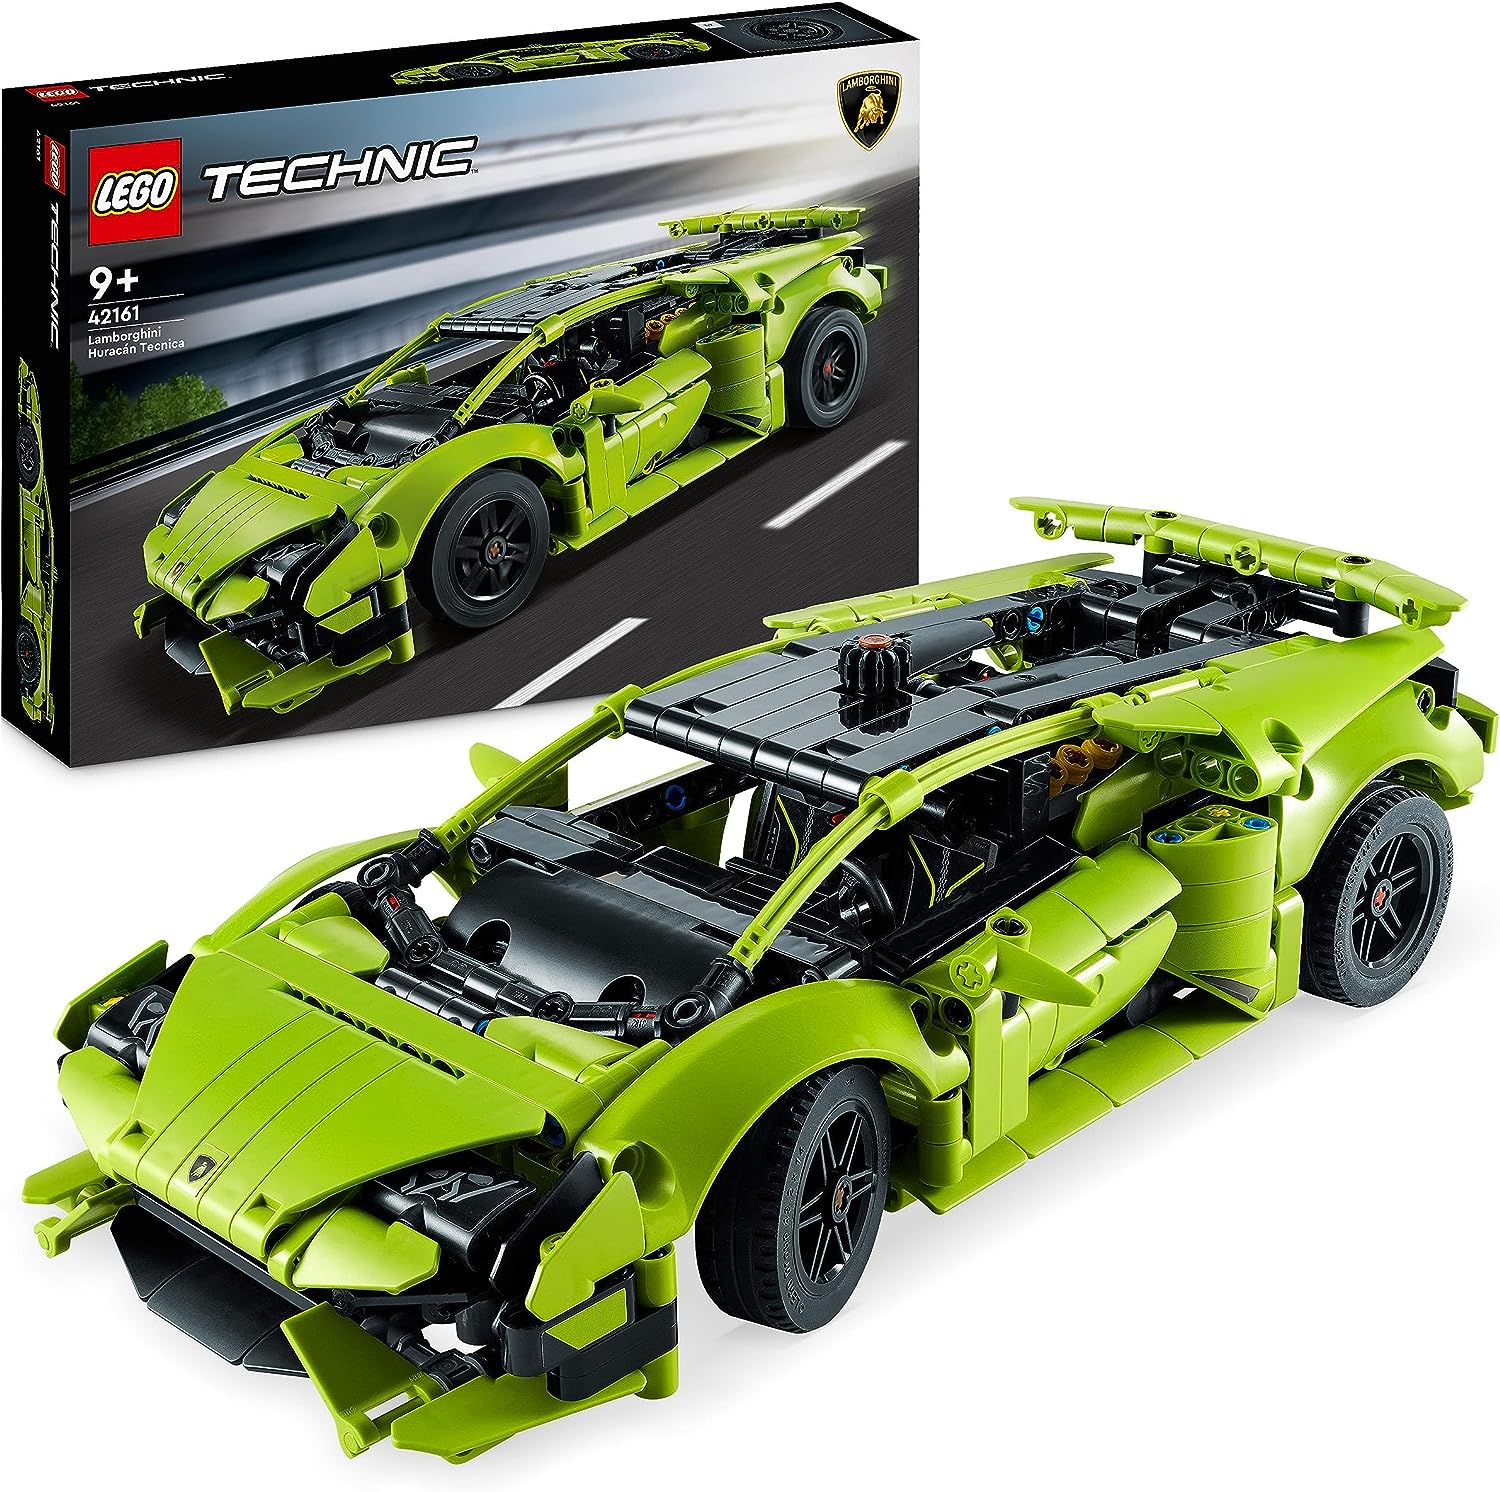 LEGO 42161 Technic Lamborghini Huracán Tecnica Toy Car Model Kit, Racing Car Construction Kit for Kids, Boys, Girls and Motorsport Fans, Collectable Car Gift